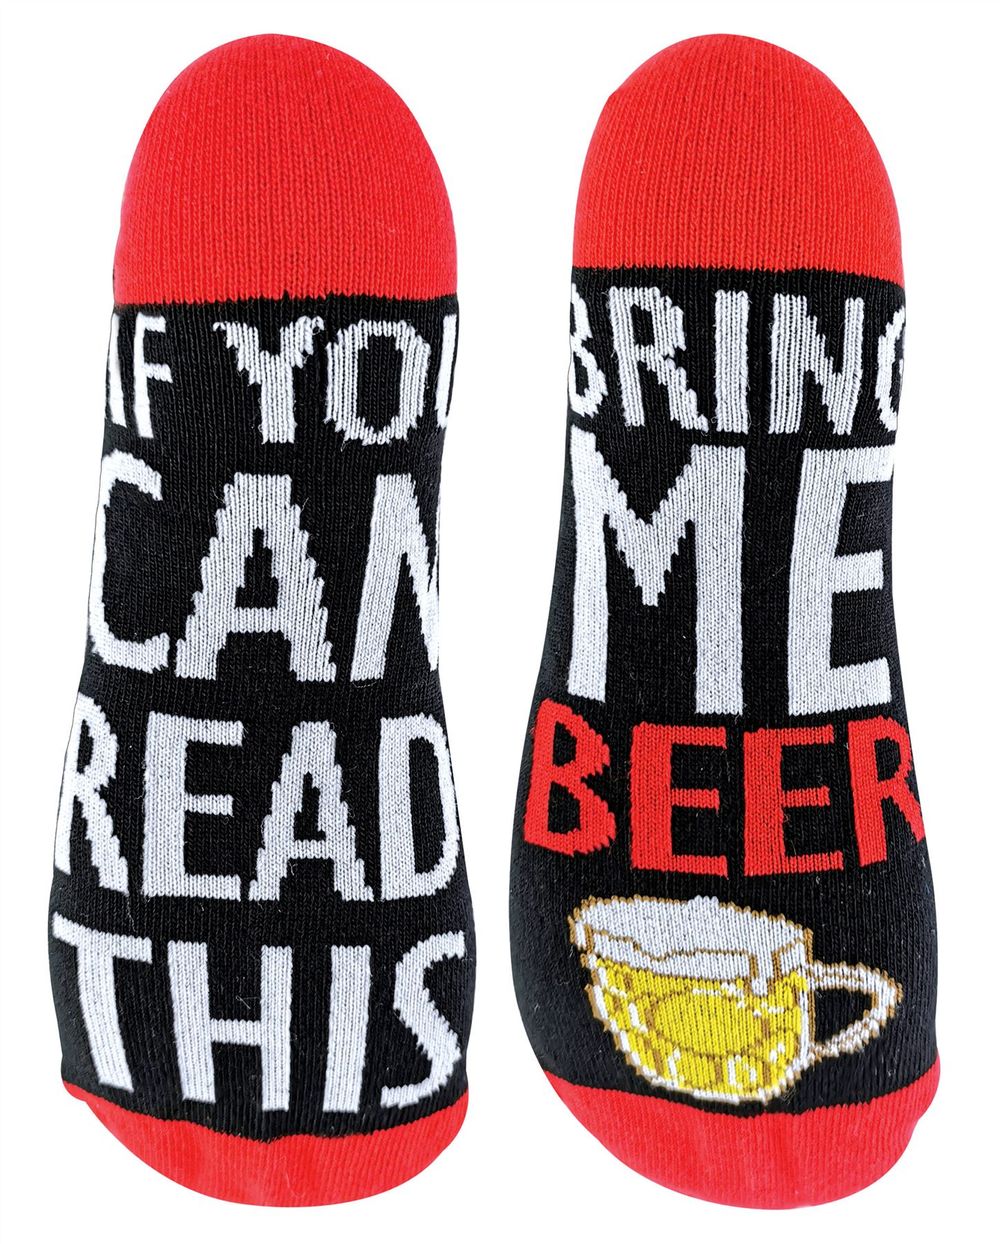 If you can read this bring me... socks